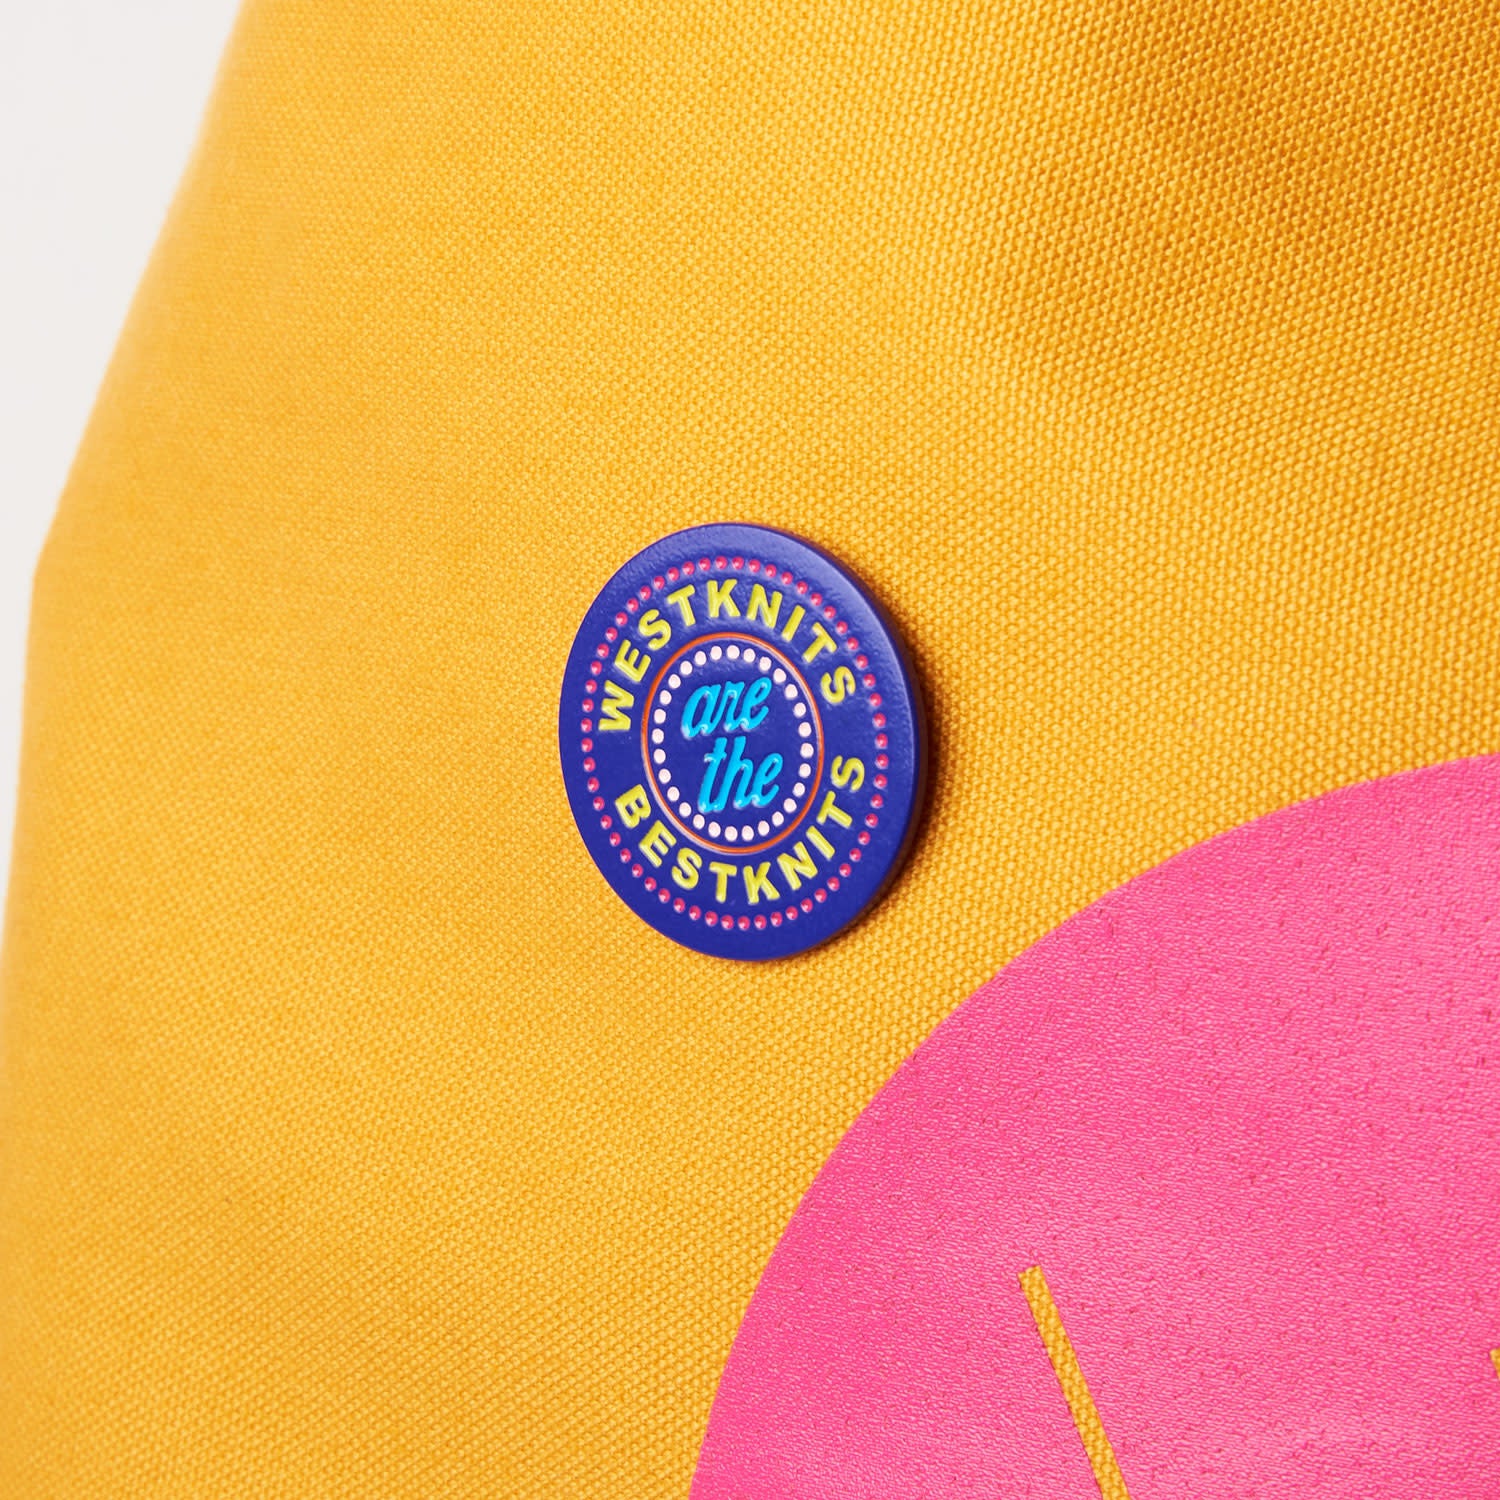 BLUE WESTKNITS ARE THE BEST KNITS ENAMEL PIN